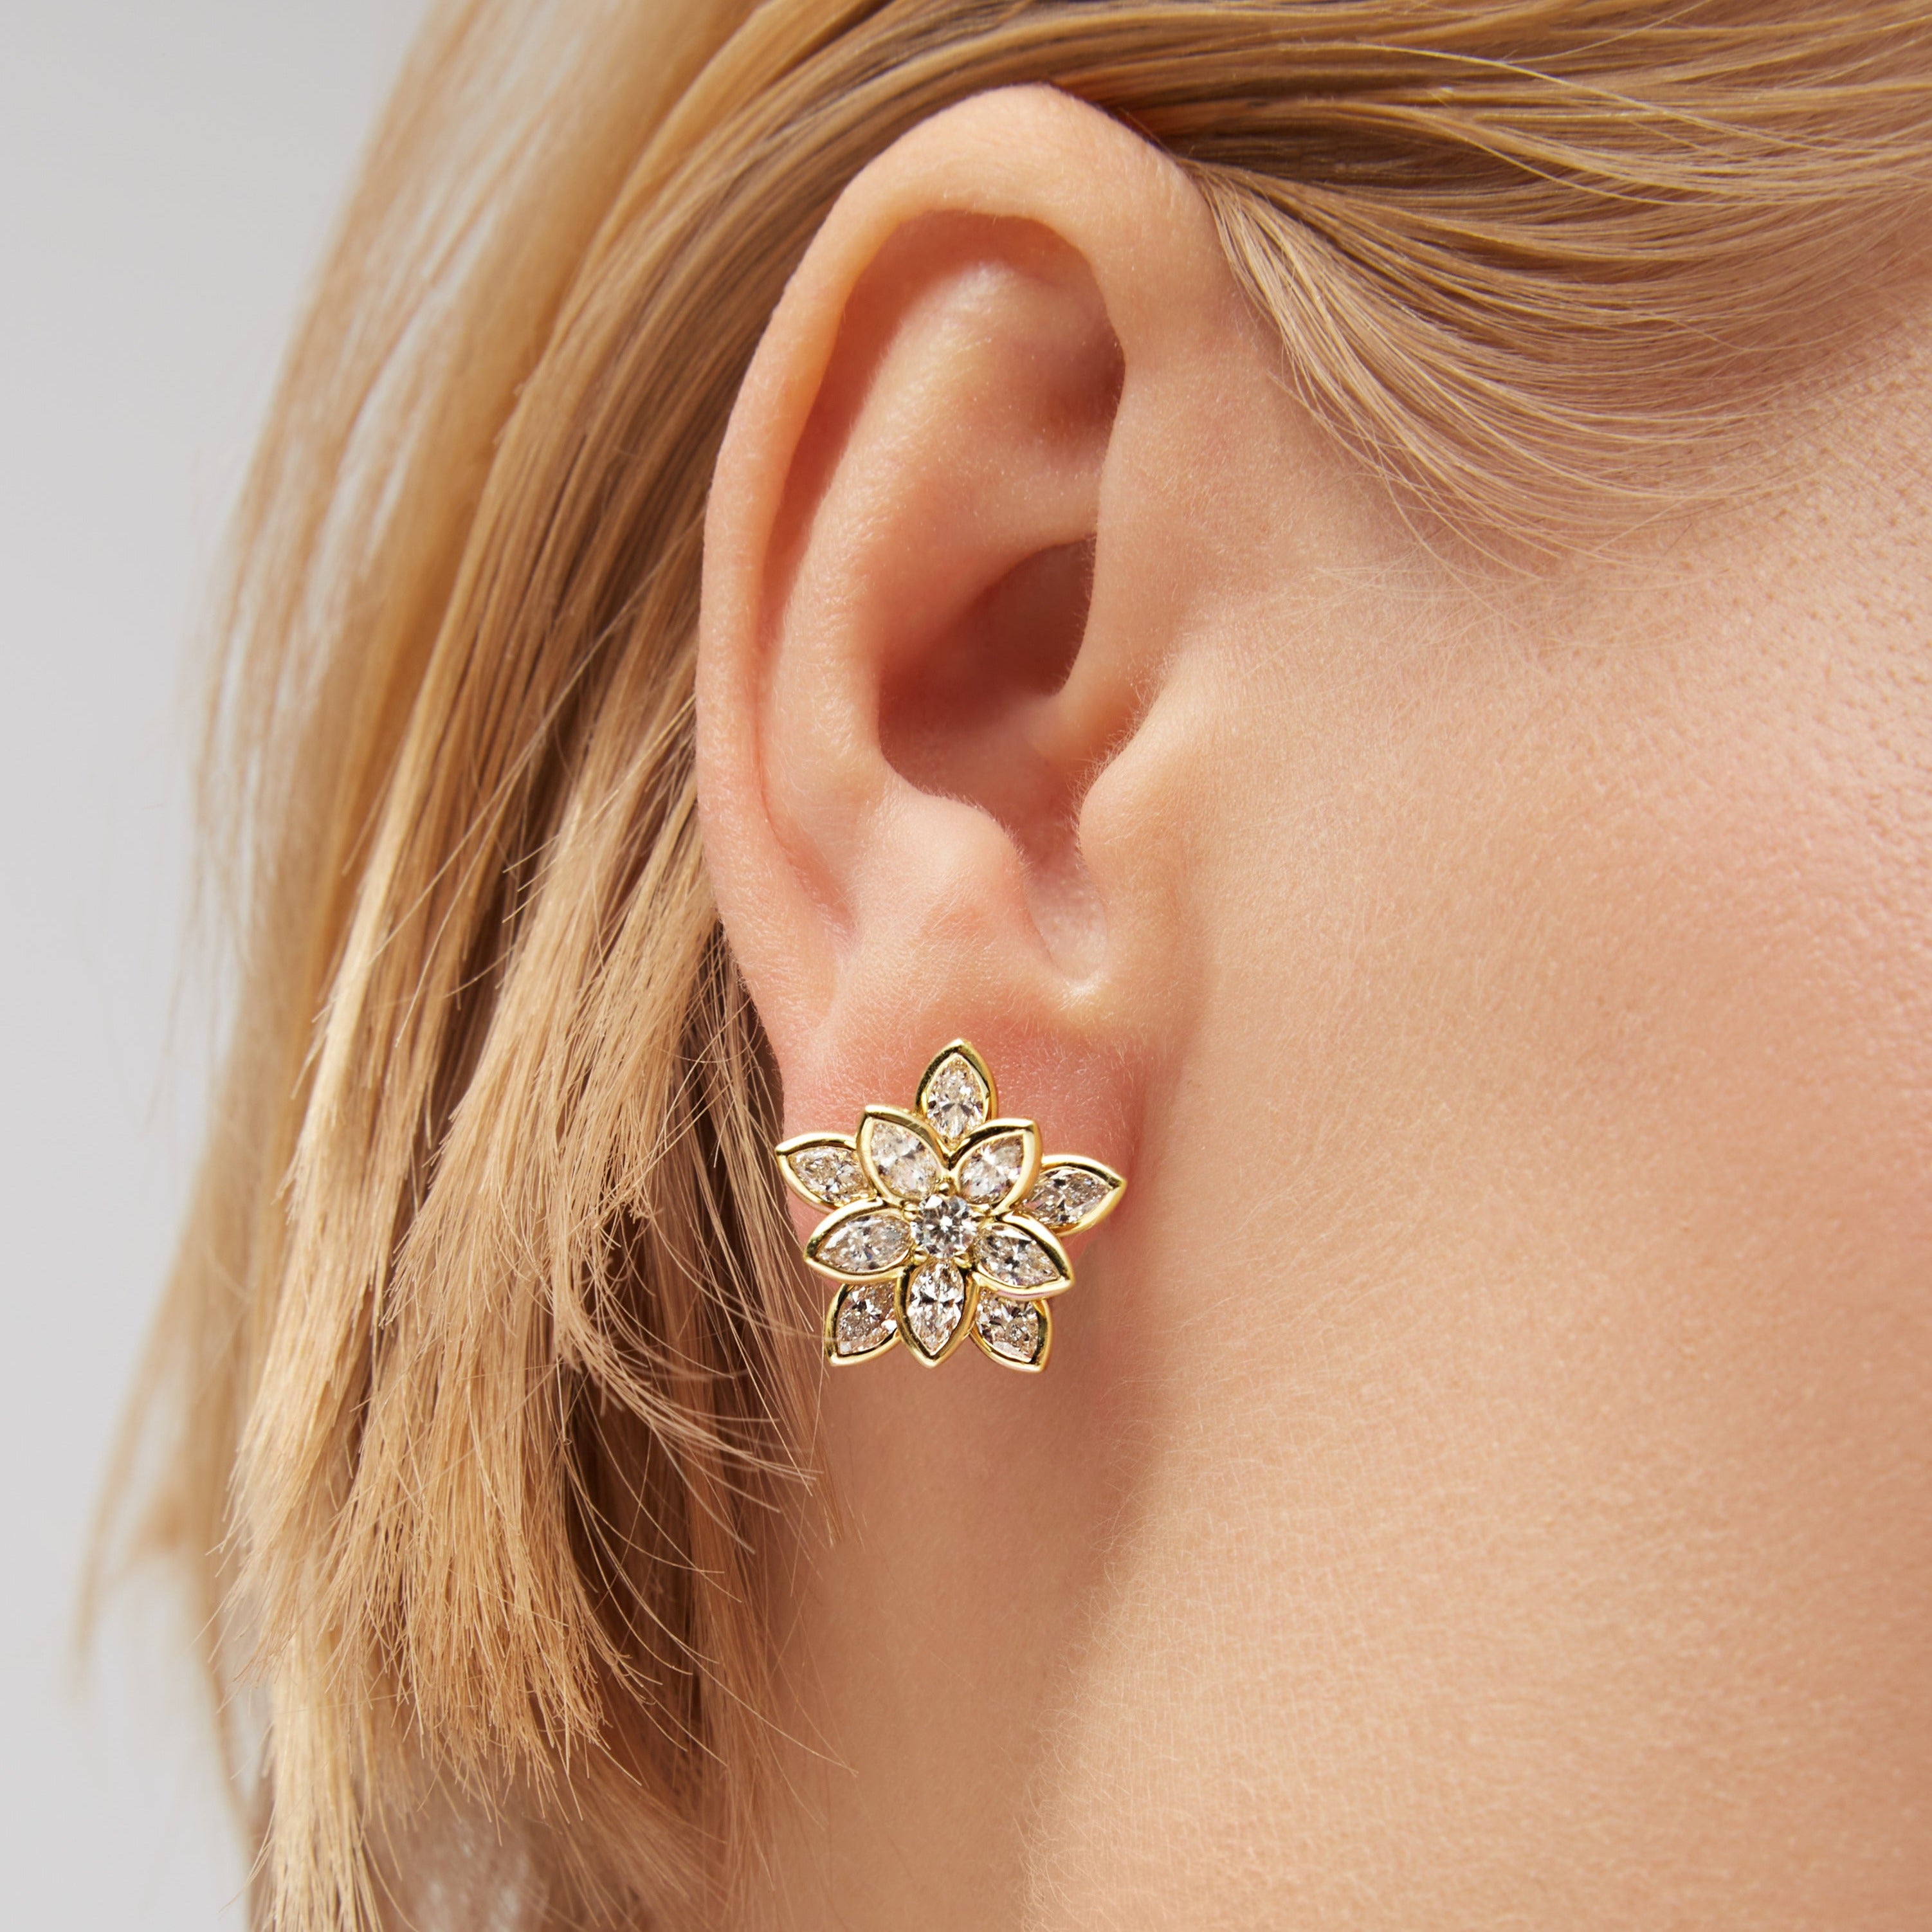 Dimensional Flower Shape Marquise & Round Brilliant Diamond Stud Earrings in 18K Yellow Gold